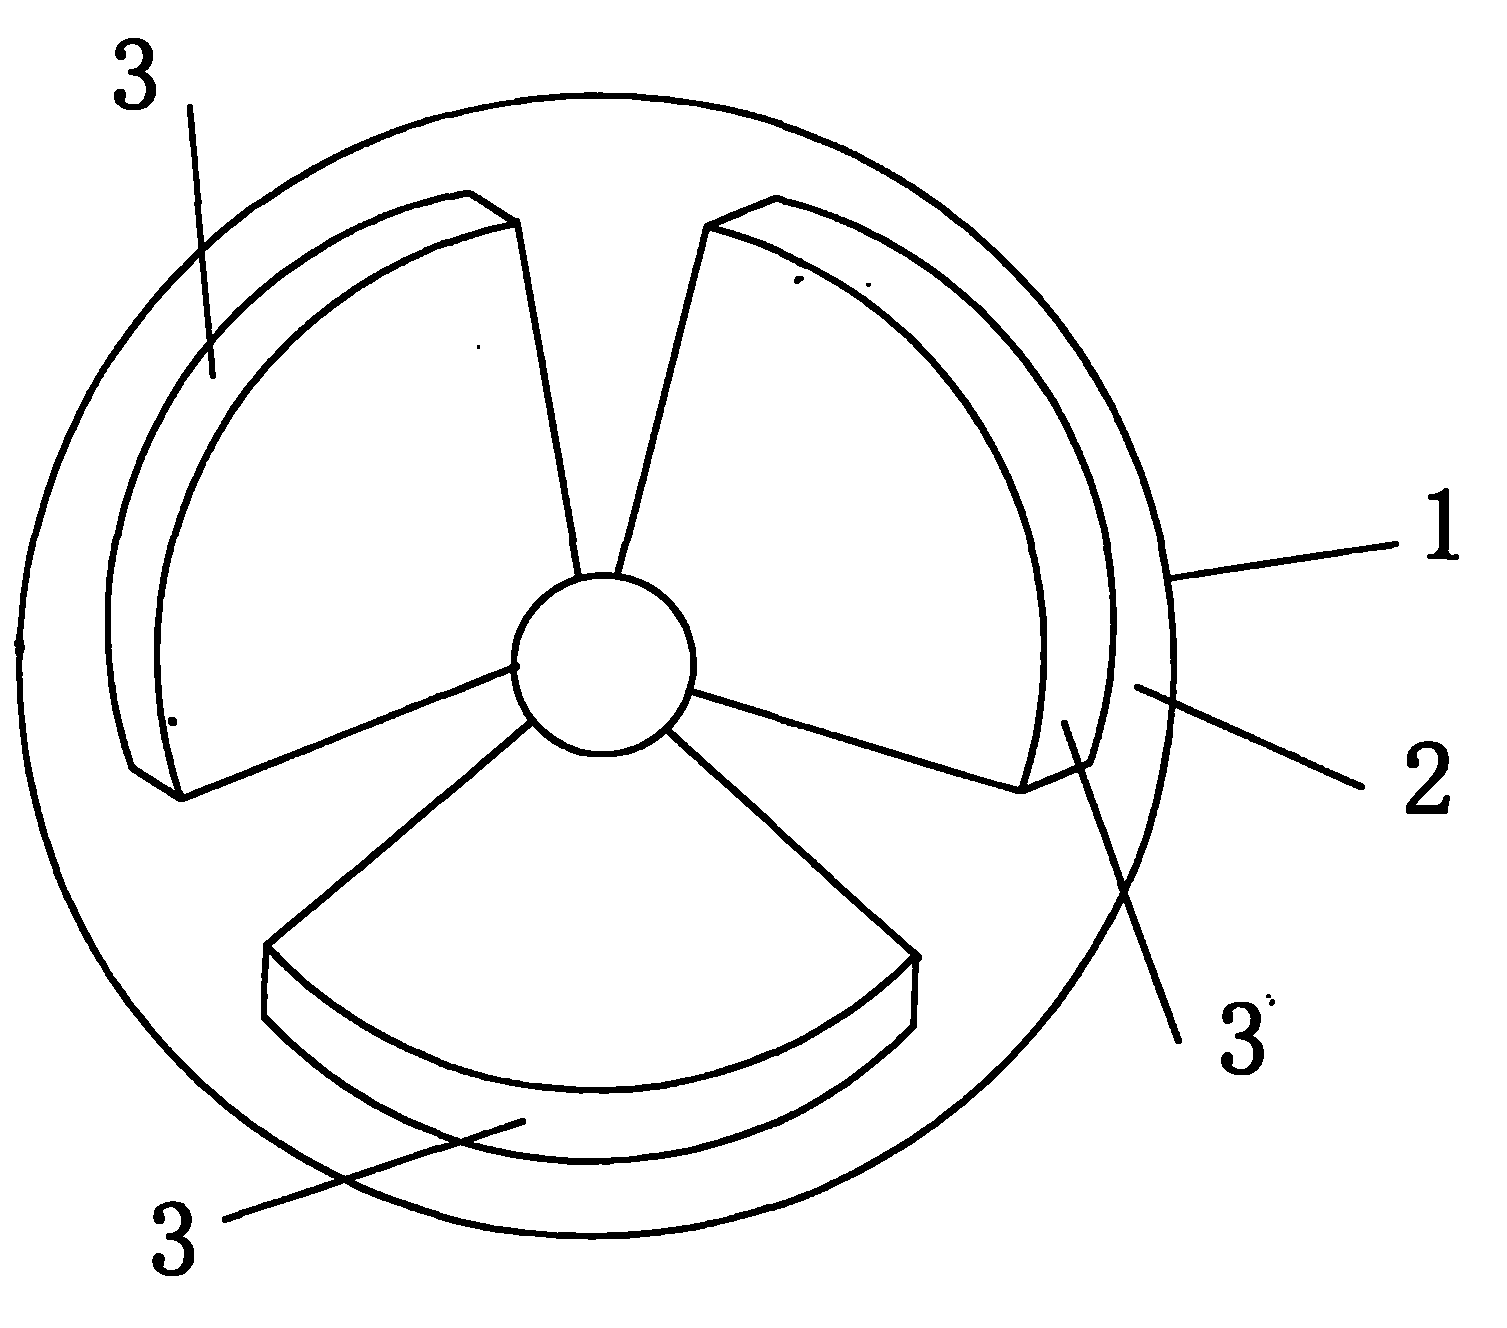 Surface color processing method for vehicle wheels and wheels thereof